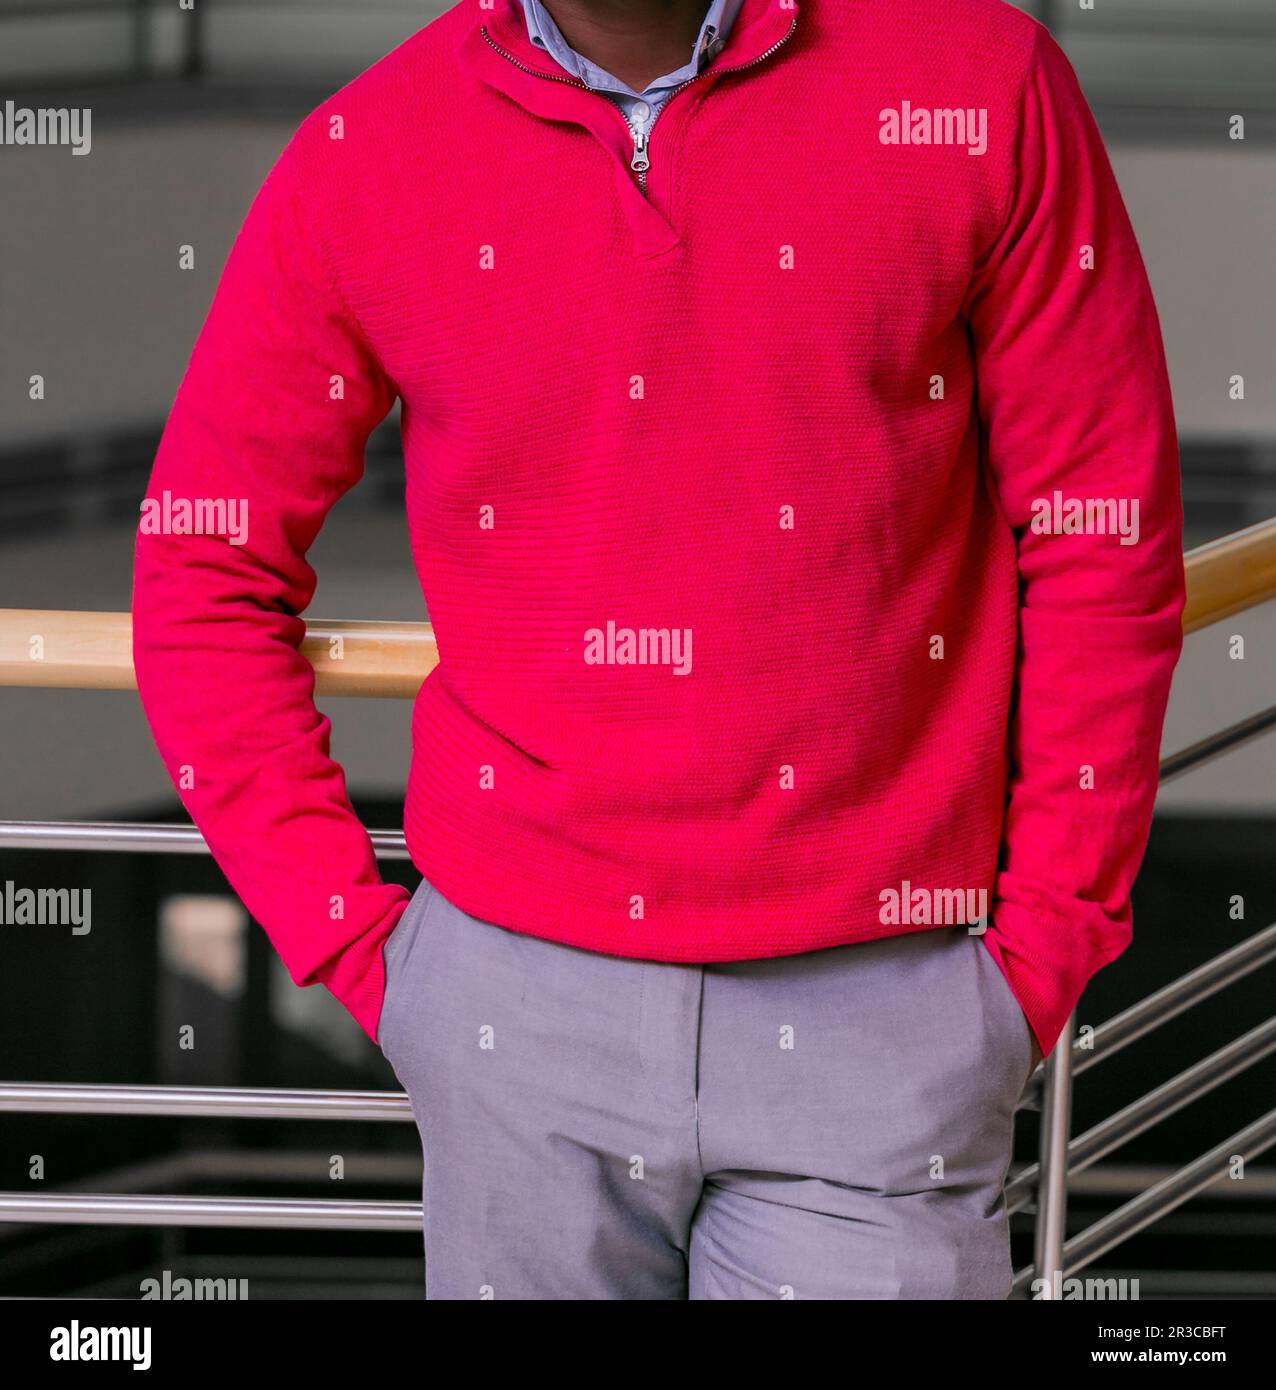 Cropped Head Man standing in a jumper sweater Stock Photo